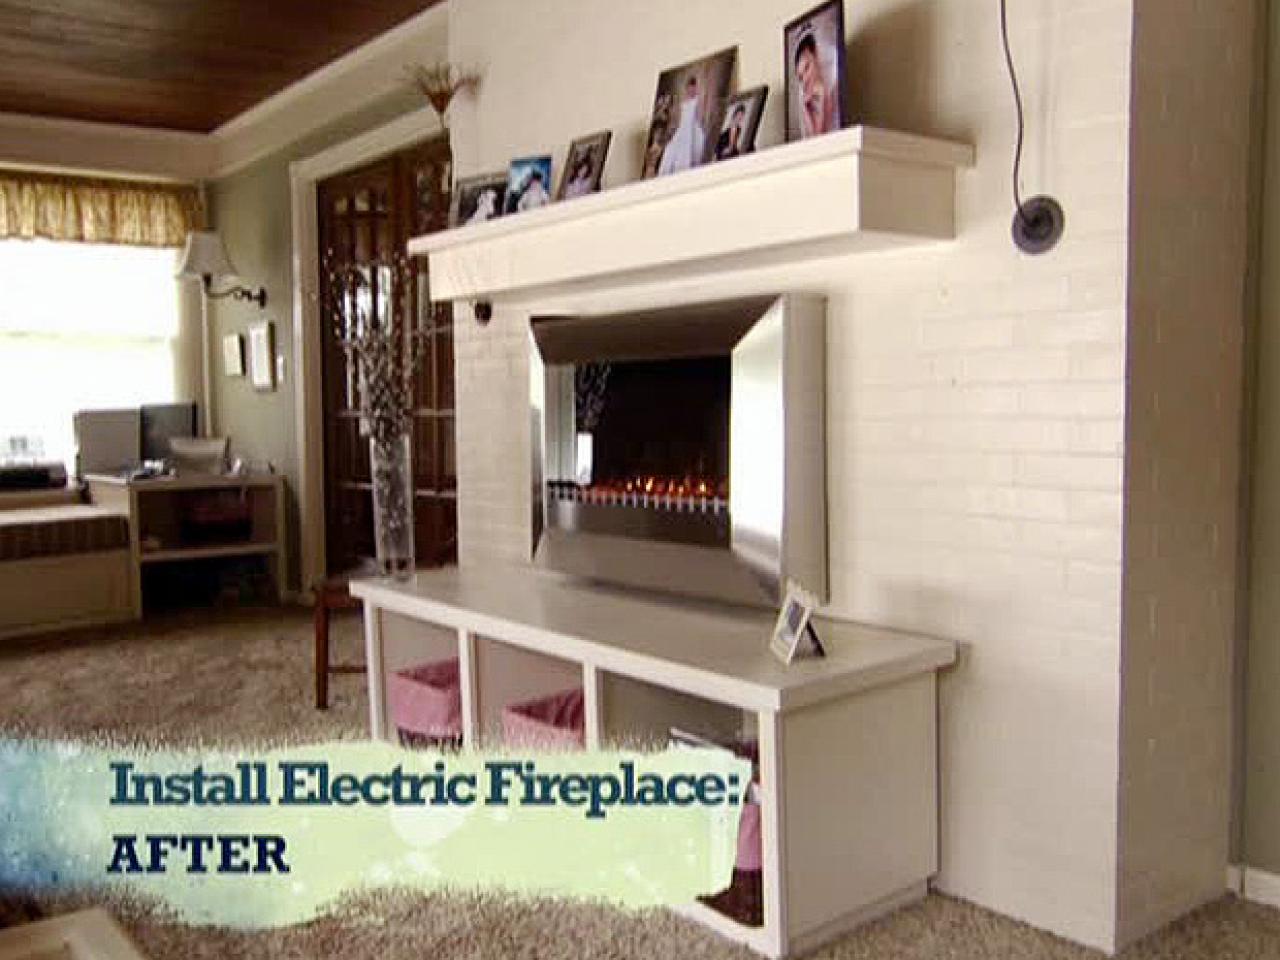 How do you install an electric fireplace?